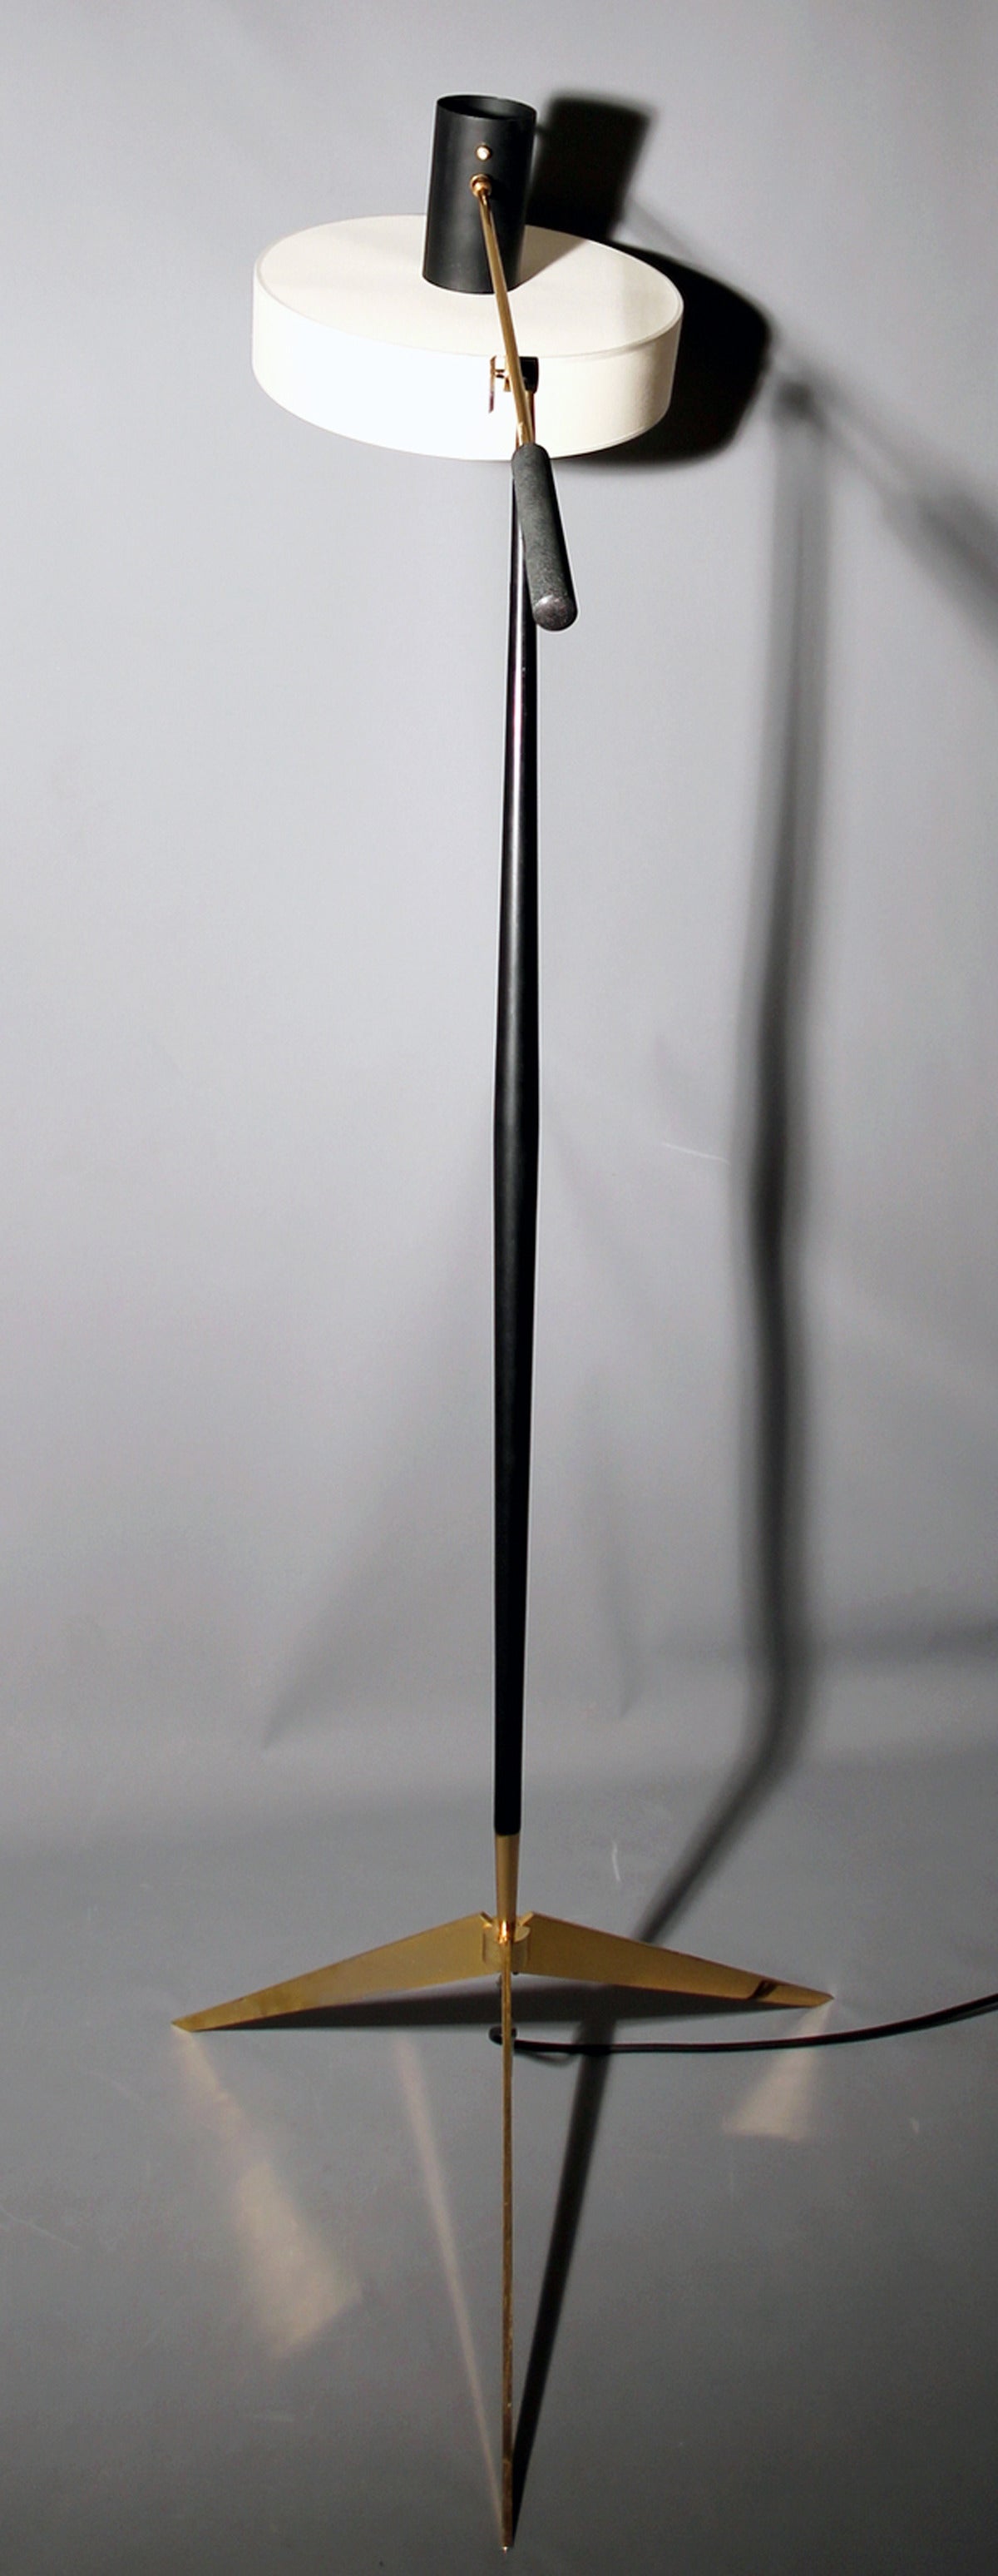 1950’s floor lamp by Lunel, in black lacquered steel and polished brass, with a rotating arm and lamp swivel. Lampshades redone as identical.
Height: 135 cm
Length of light arm: 102 cm
Diameter of lampshade: 17 in (43 cm)